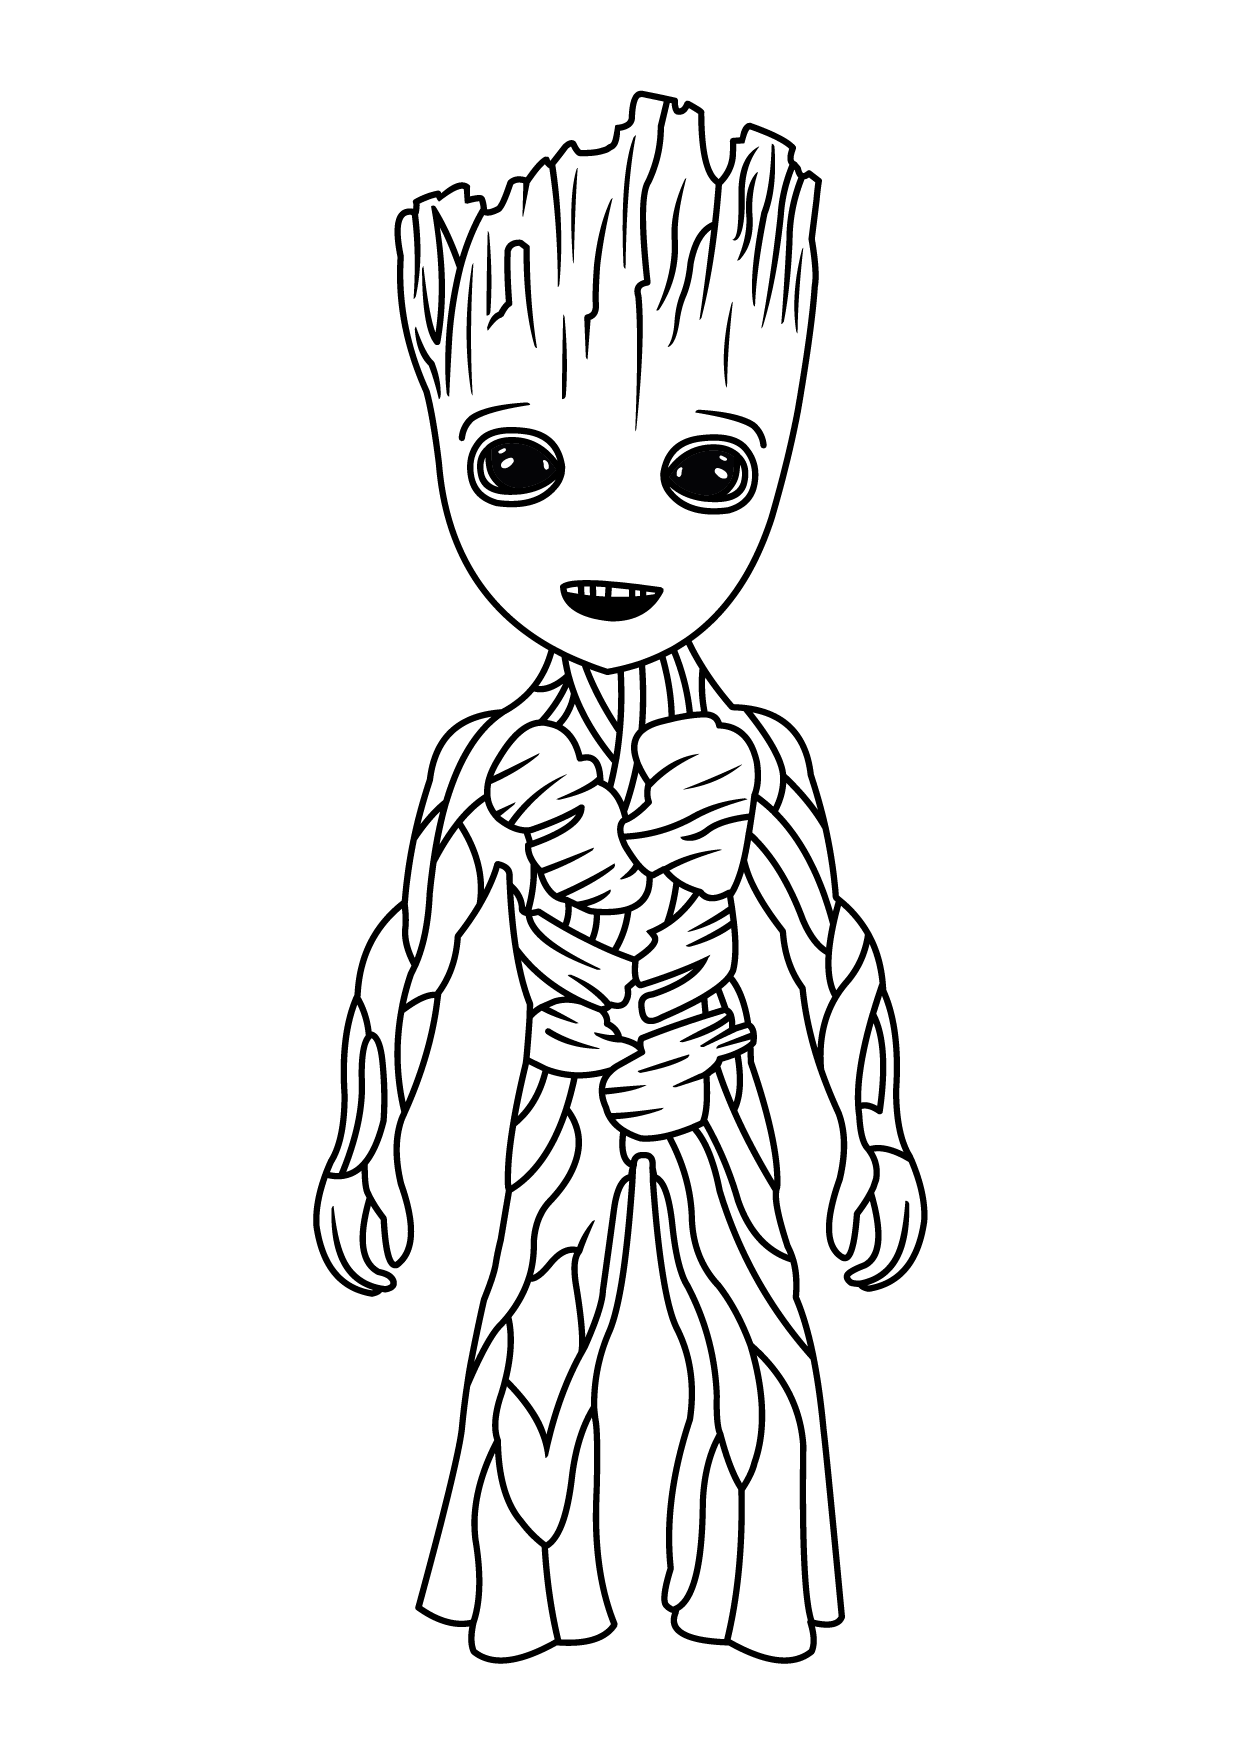 Cute Baby Groot Coloring Page - Free Printable Coloring Pages for Kids